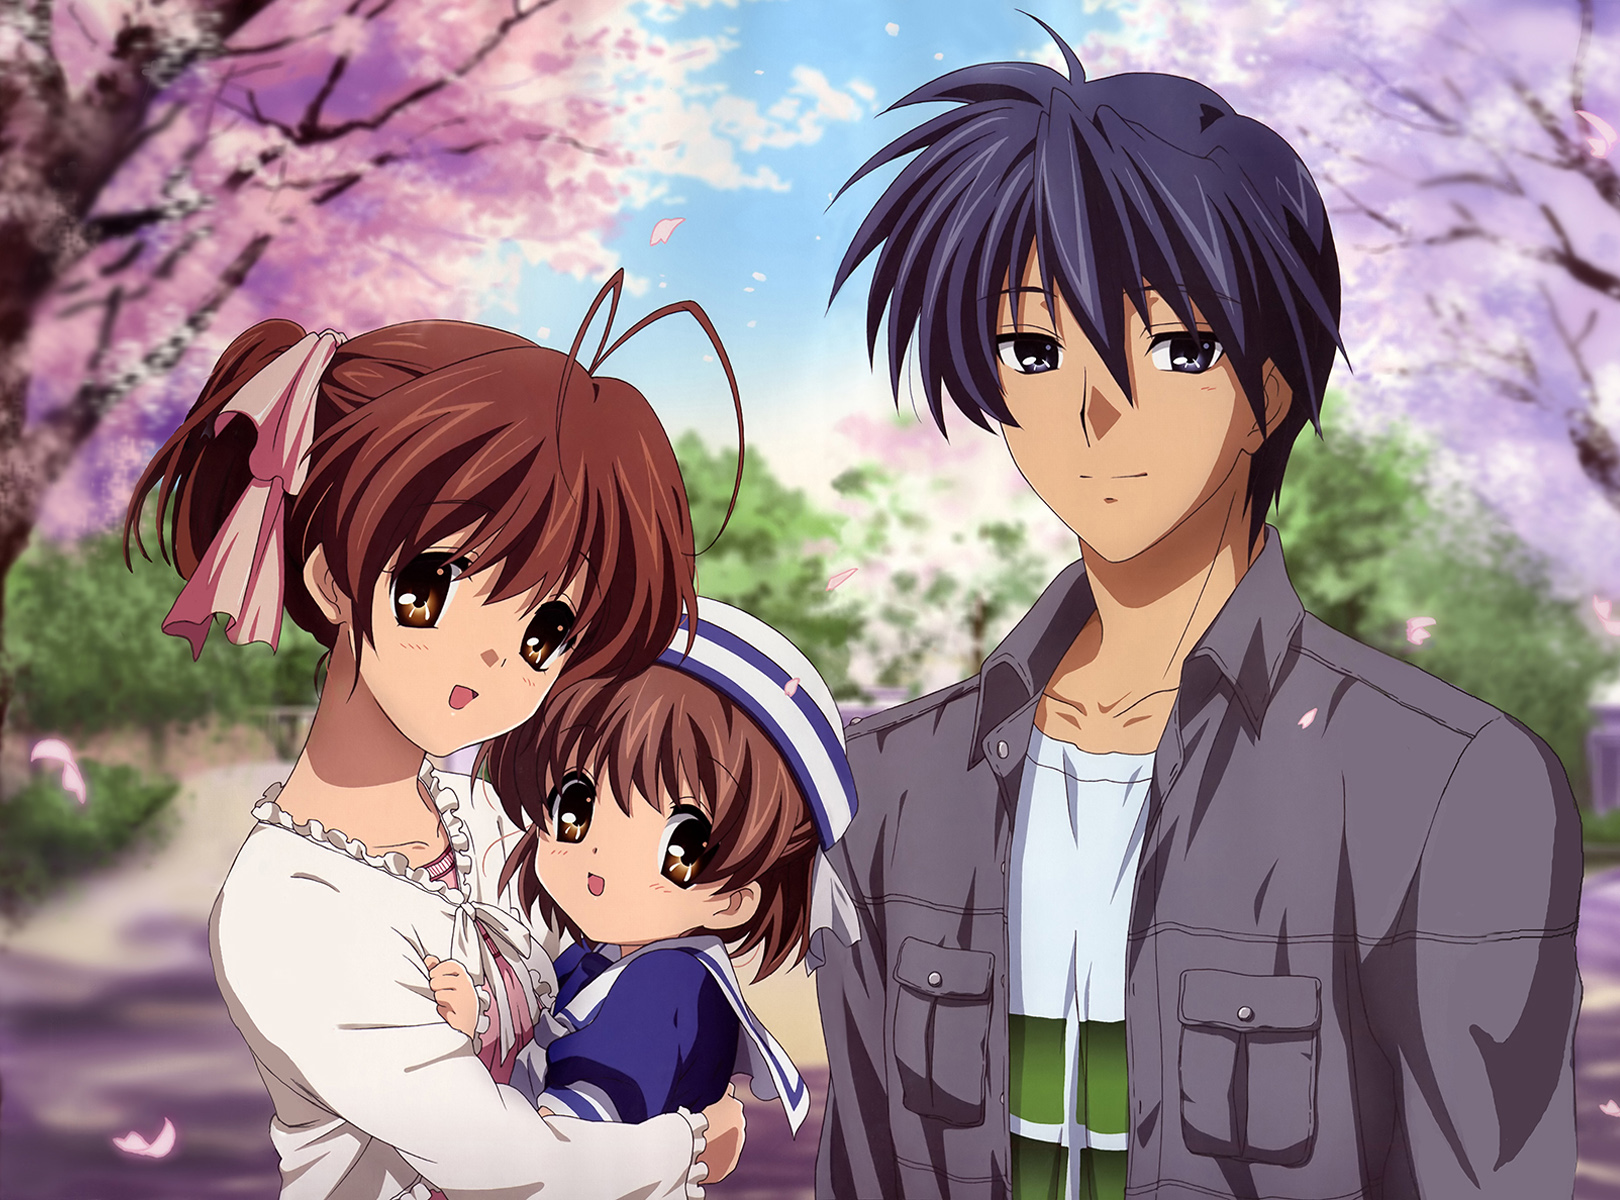 Clannad Anime Review 2020. Is it worth watching?